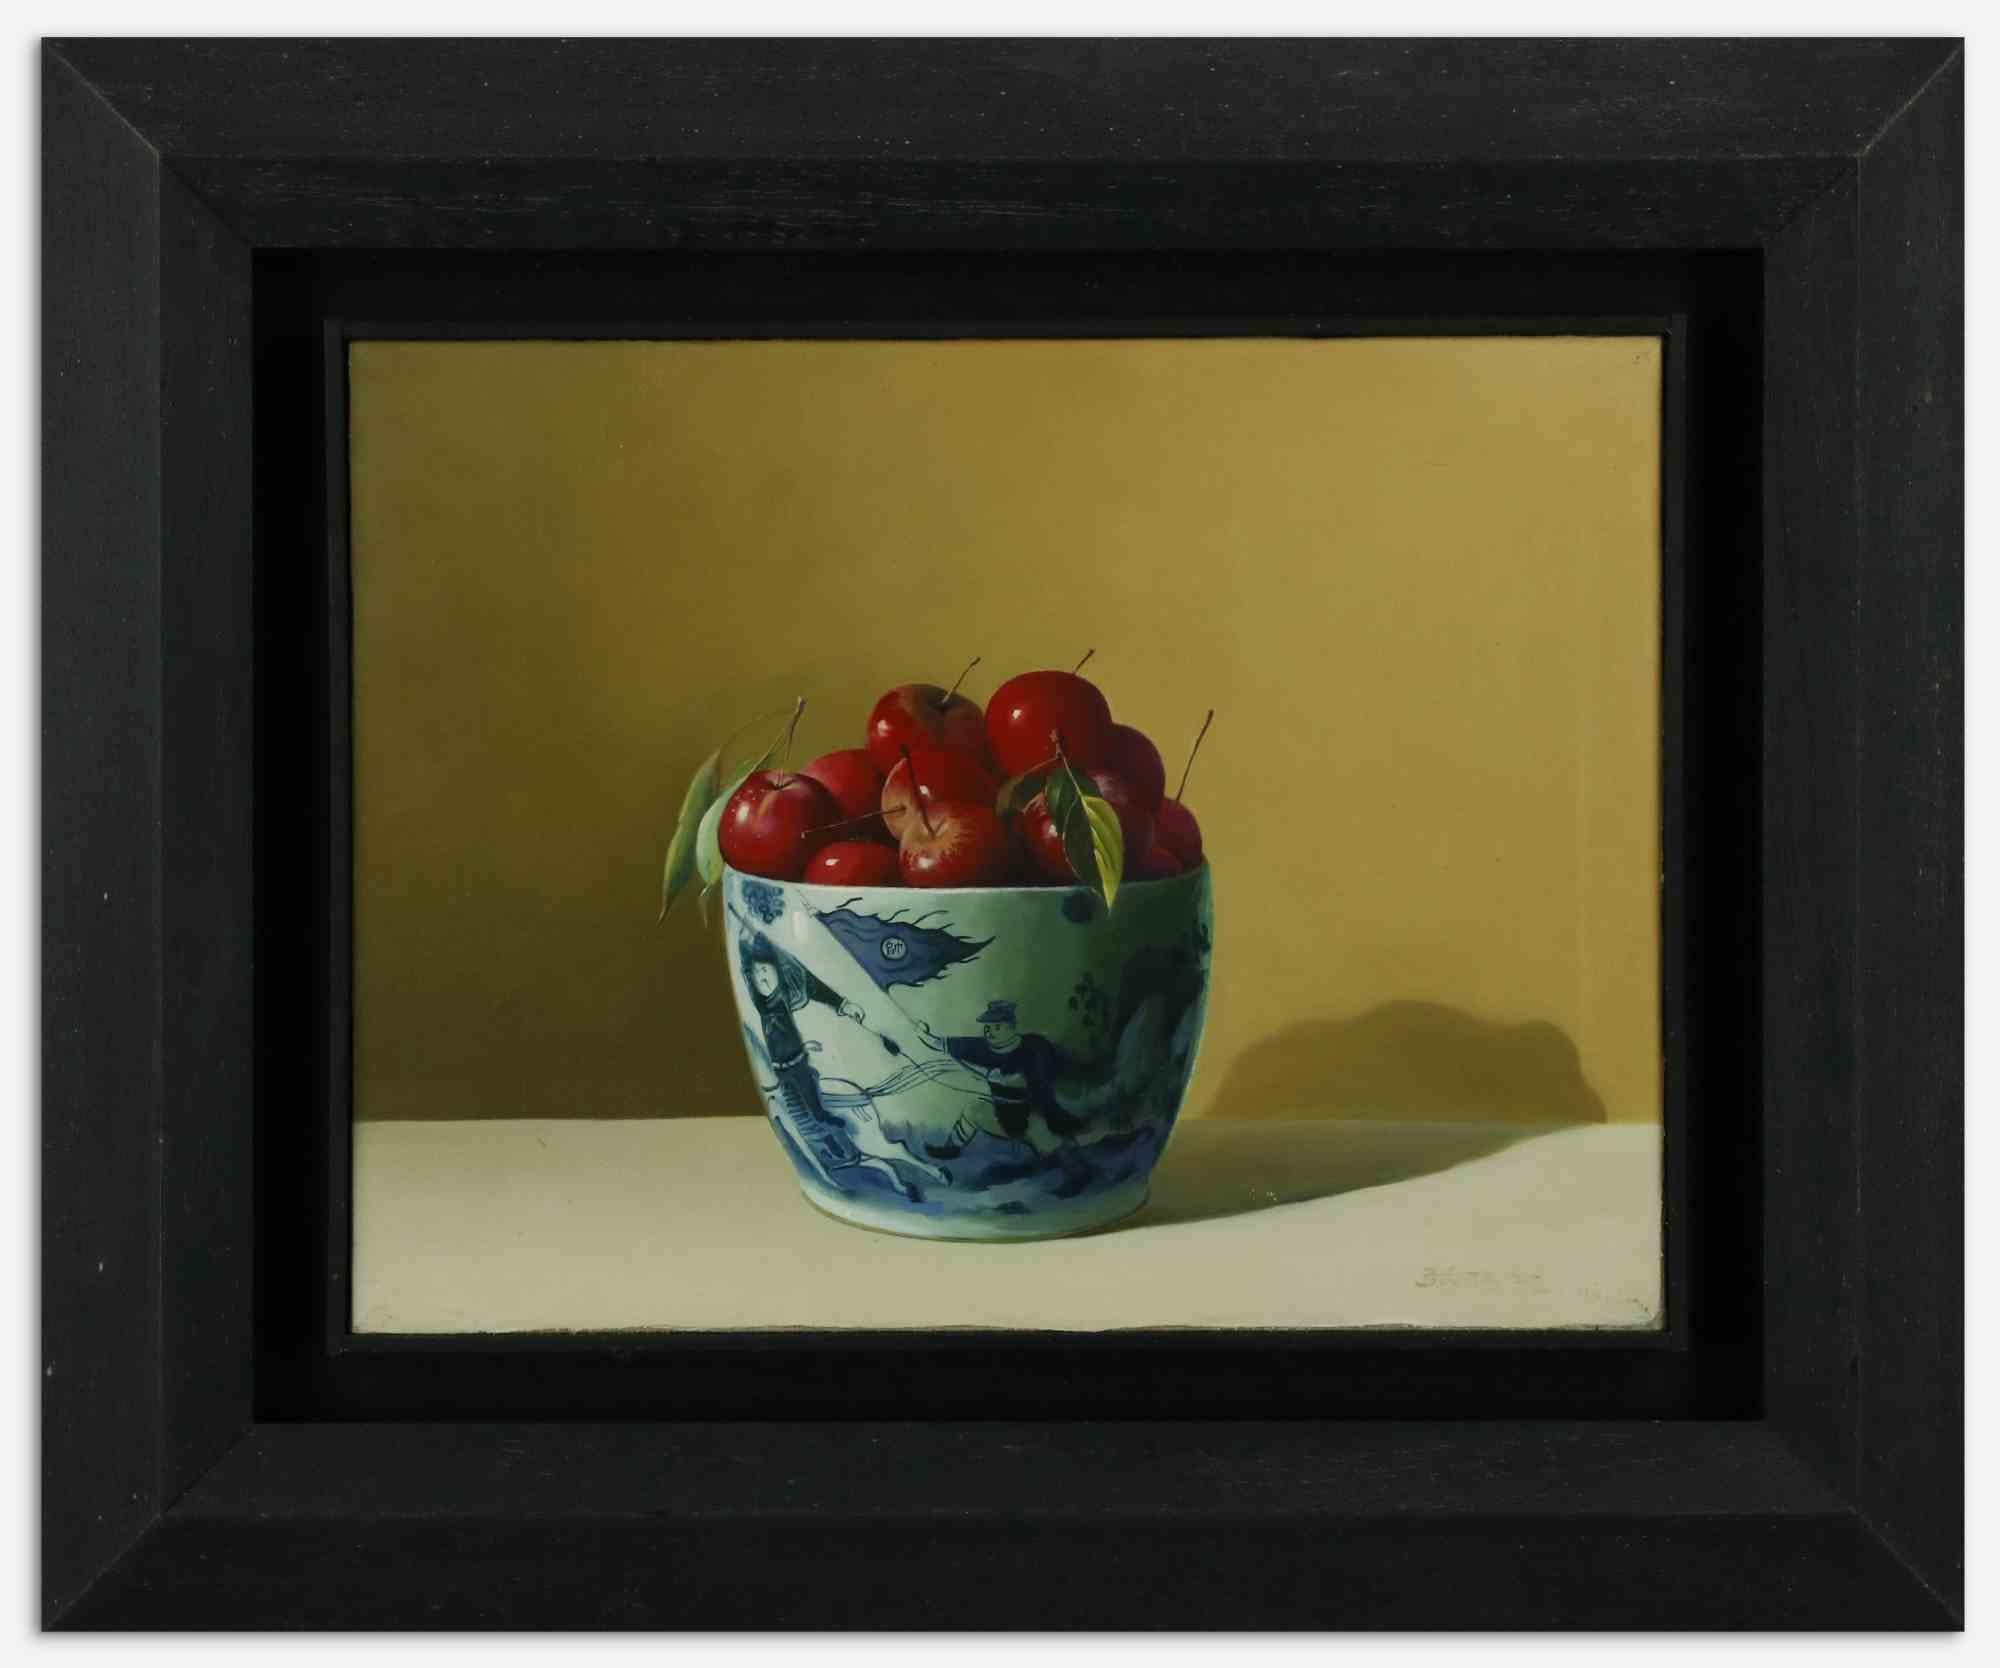 Cherries - Oil Painting by Zhang Wei Guang - 2007